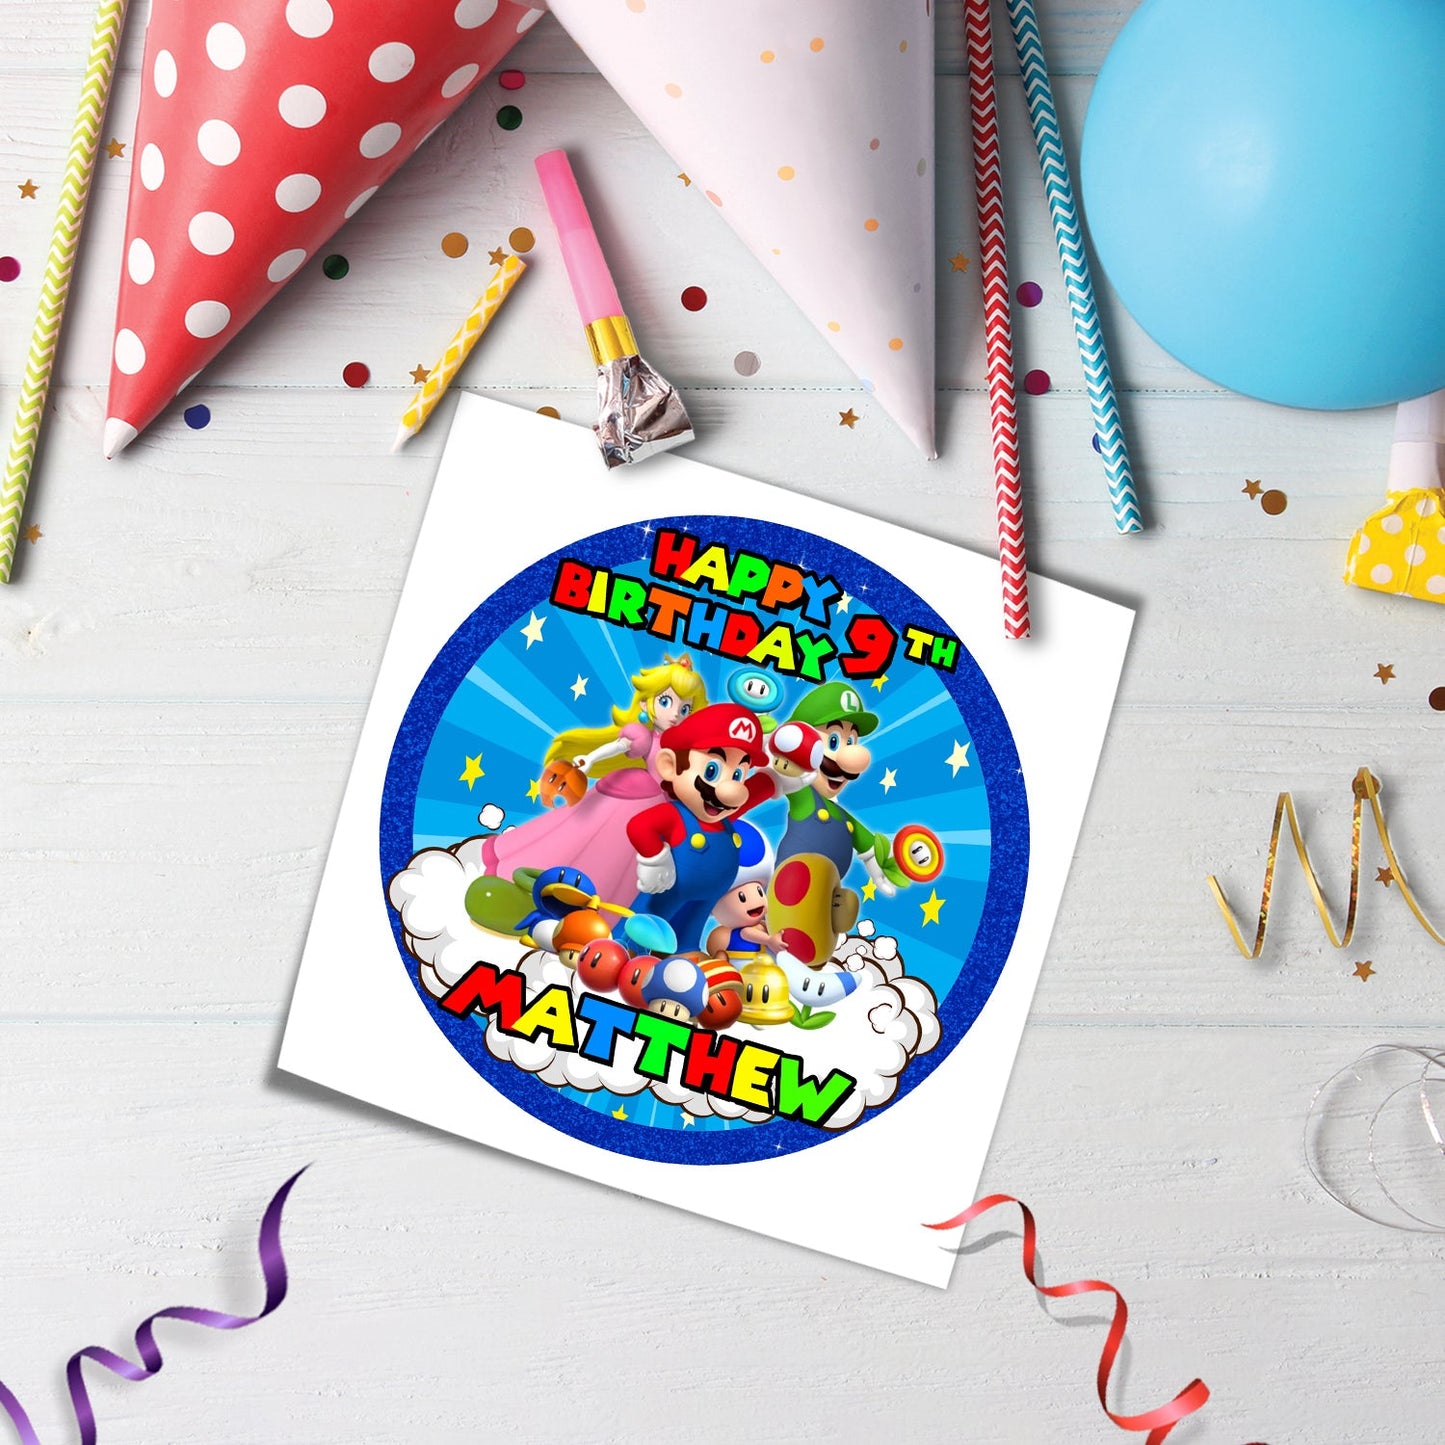 Round Super Mario Personalized Cake Images - Perfect for Any Birthday Cake